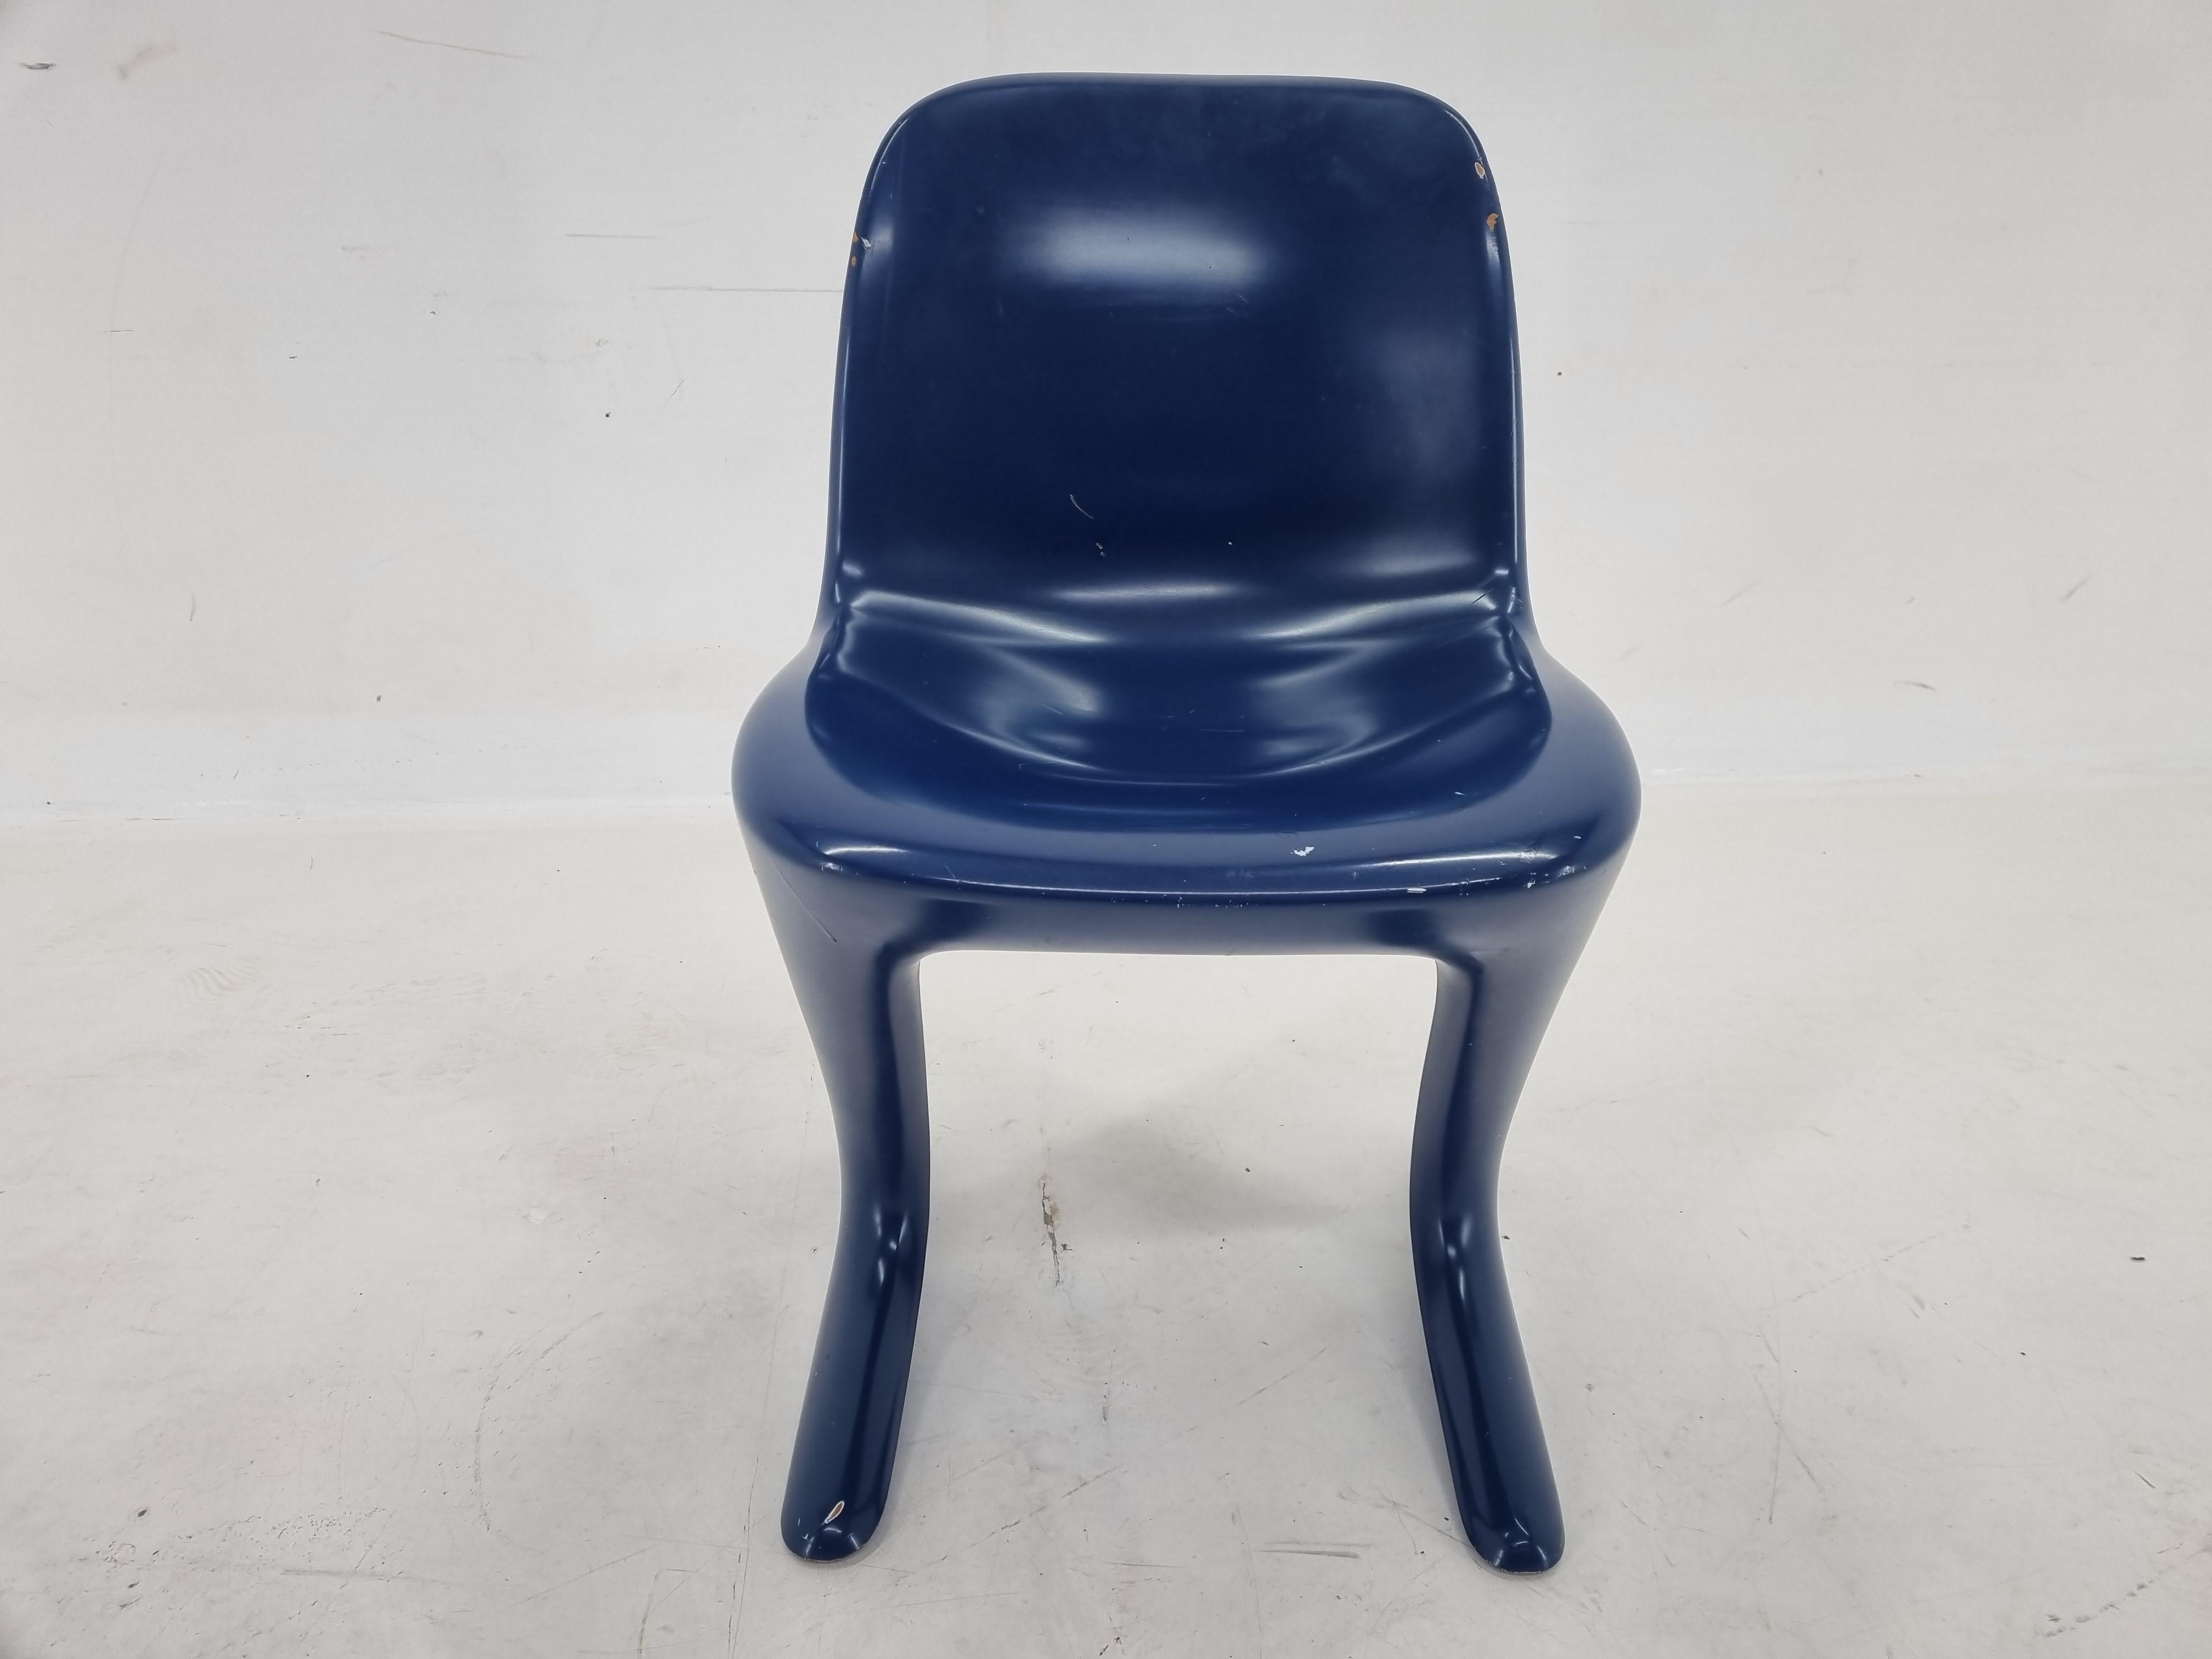 Midcentury Blue Kangaroo Chair Designed by Ernst Moeckl, Germany, 1960s For Sale 1